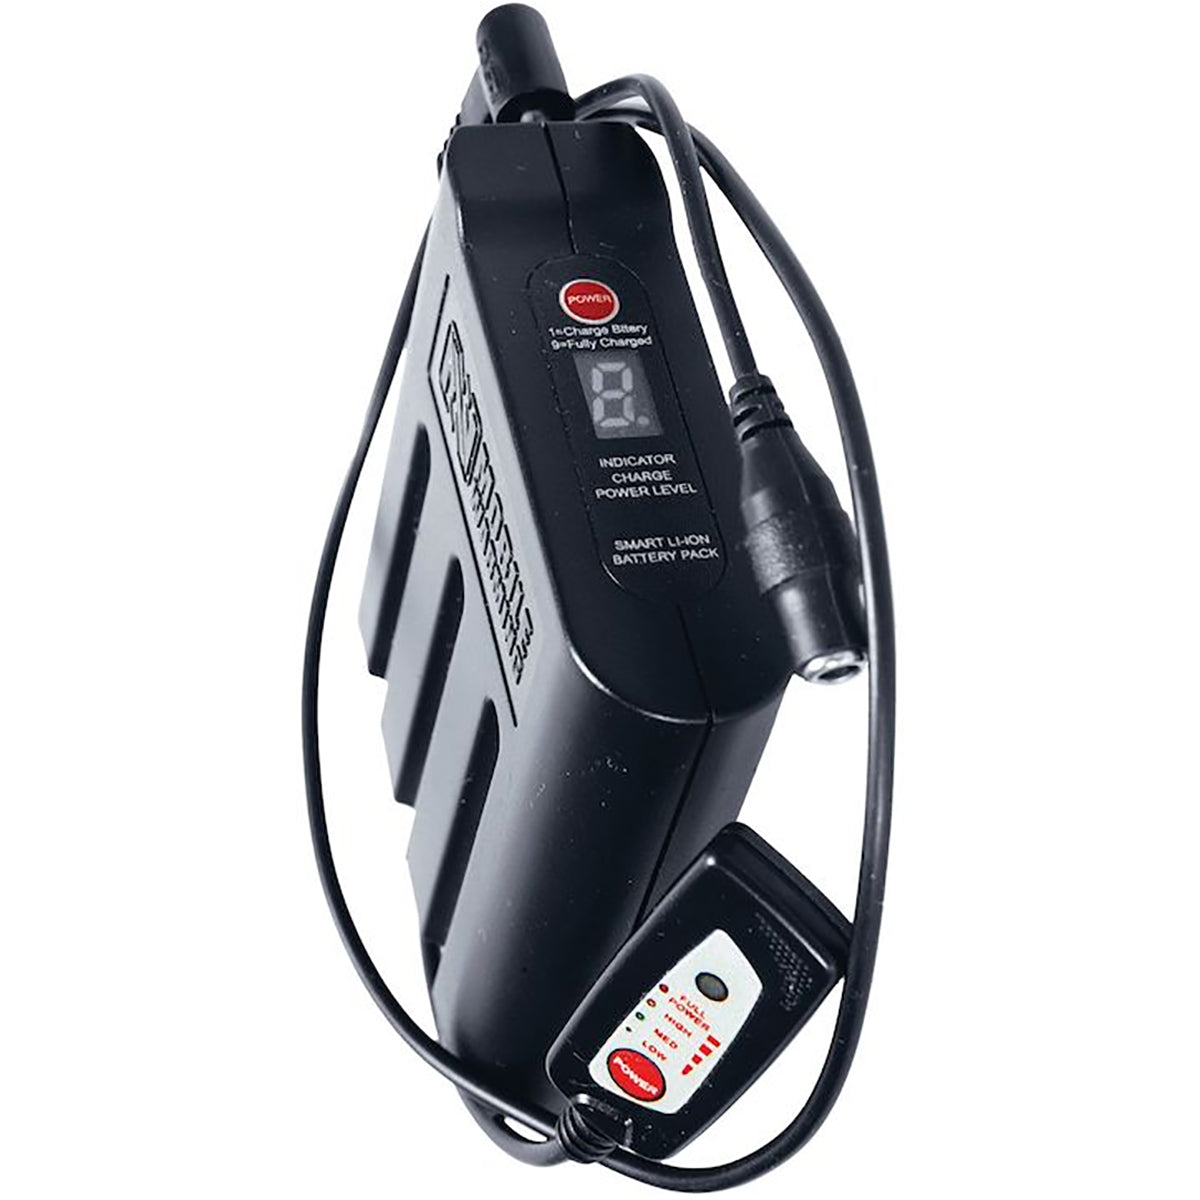 Mobile Warming Extended Battery Charger Accessories-7009